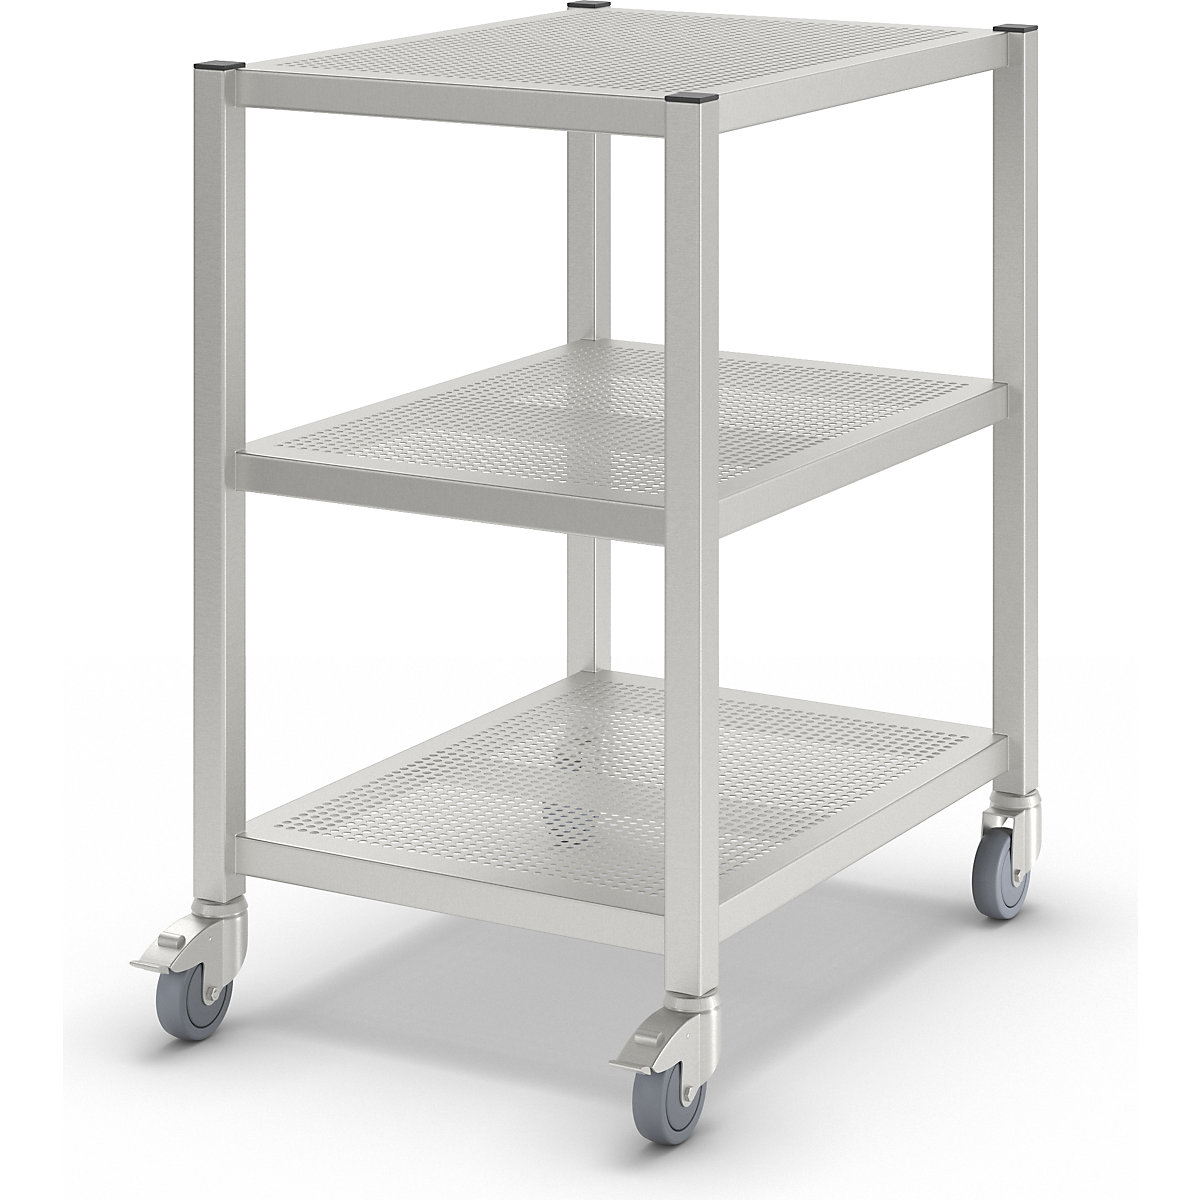 Mobile cleanroom table, made of stainless steel, 3 shelves, length 800 mm-1